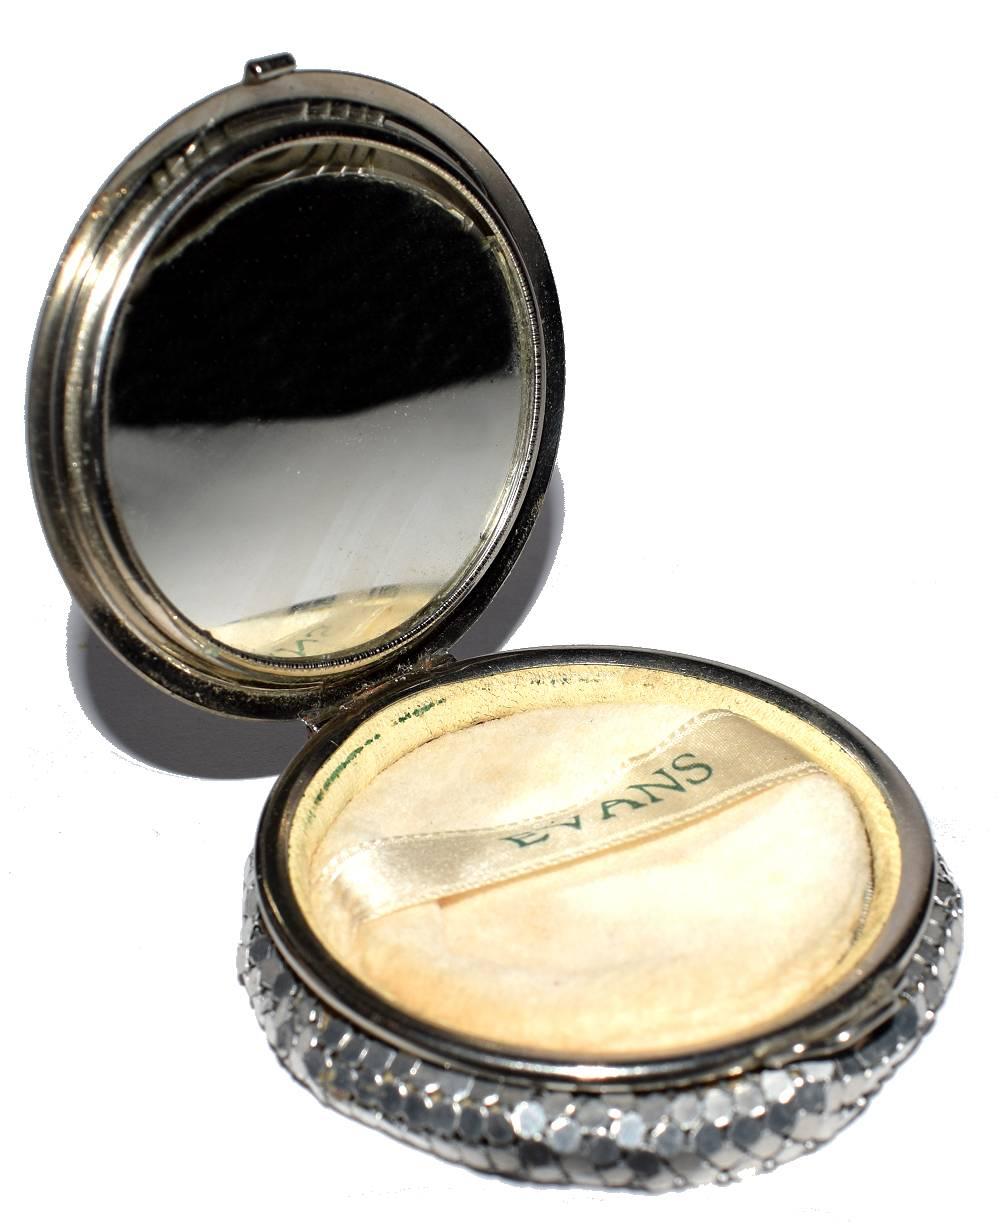 Original Art Deco vintage ladies powder compact by Evans. The lid cream enamel with a central embossed Art Deco design in chromed metal. The body of the compact is soft mesh and feels very soft to the touch. Condition is above average, the mirror is